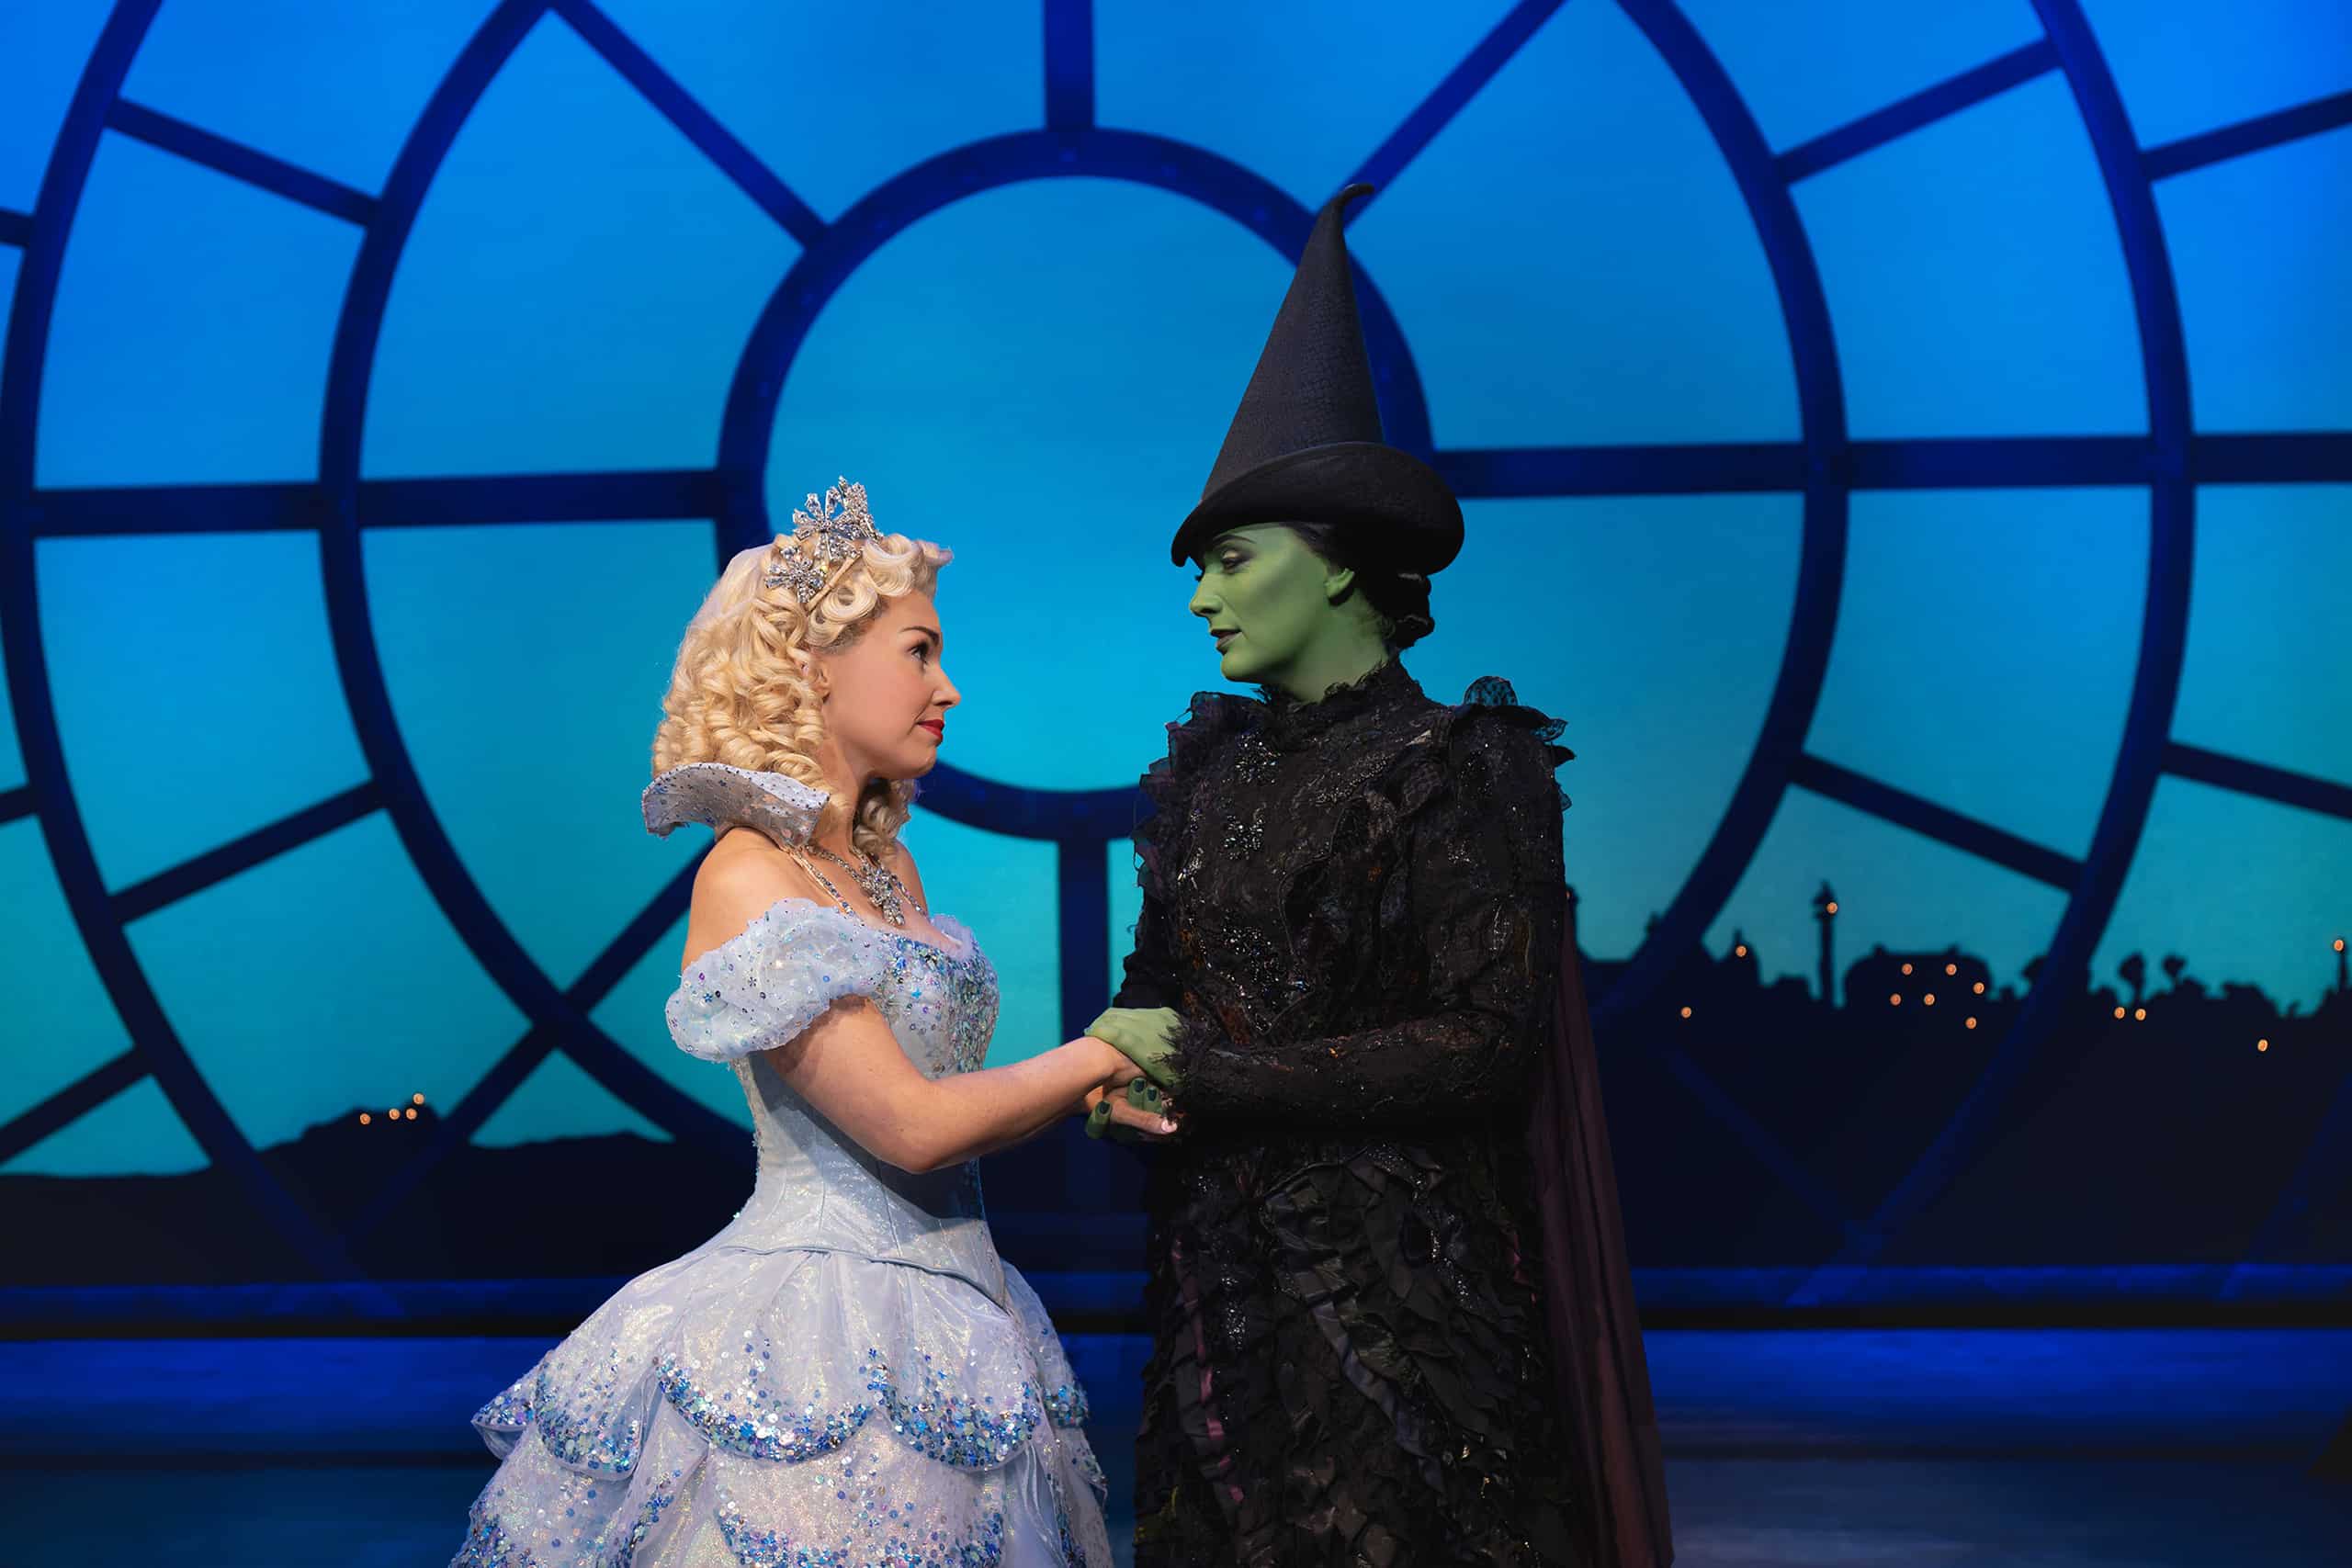 Glinda in blue ball gown holding hands and looking at Elphaba in black witch's hat and black dress